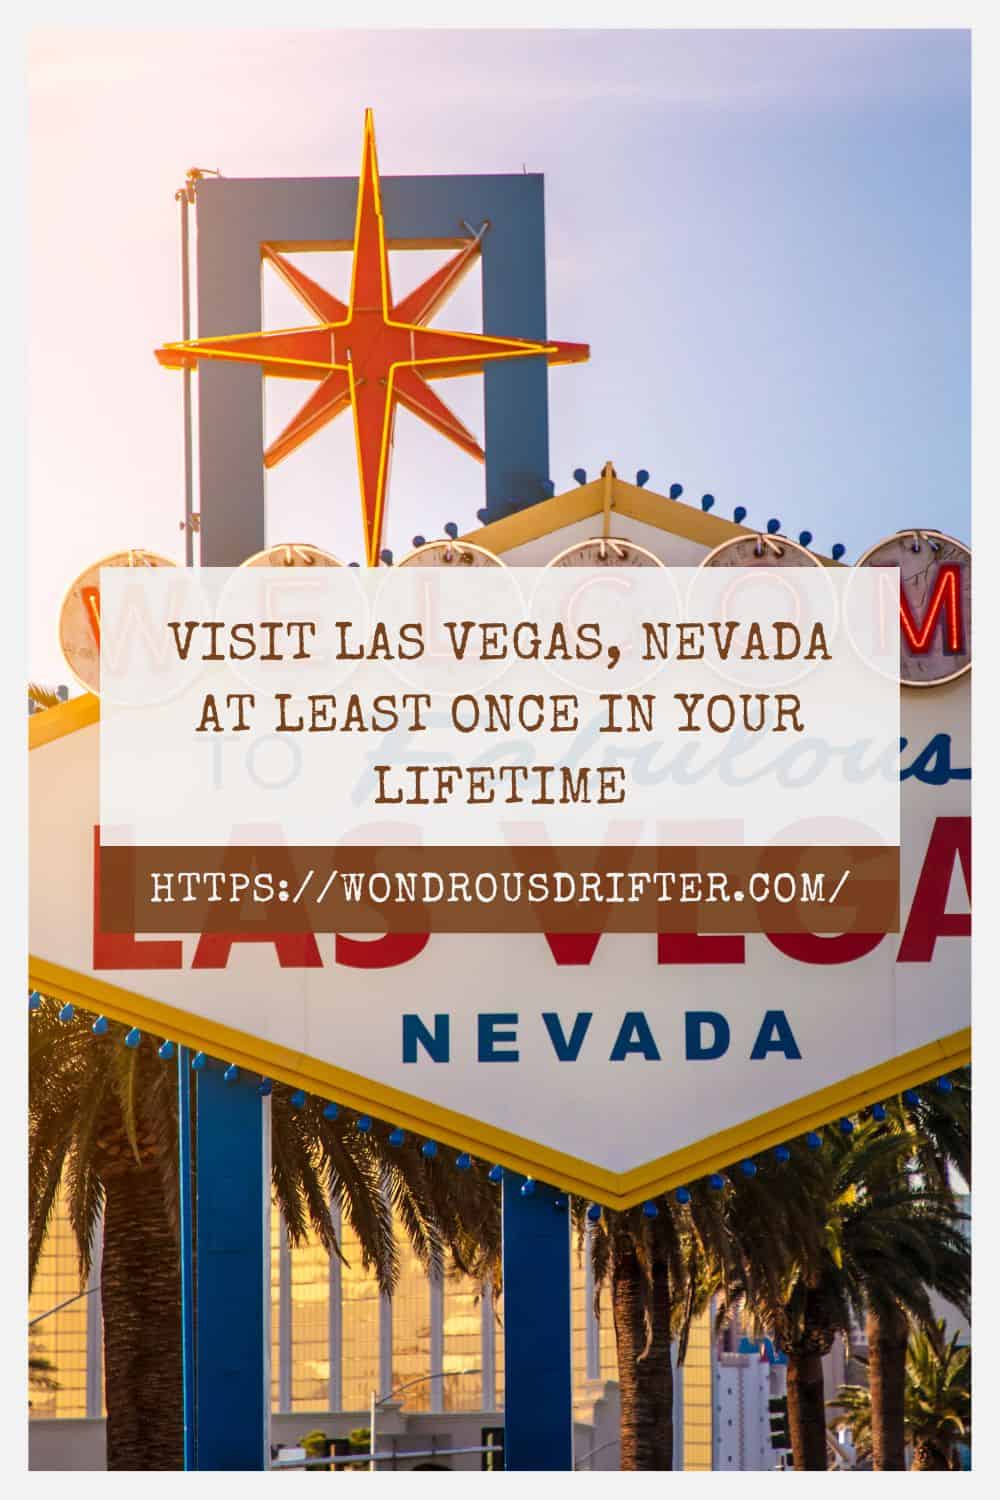 Visit Las Vegas Nevada at least once in your lifetime